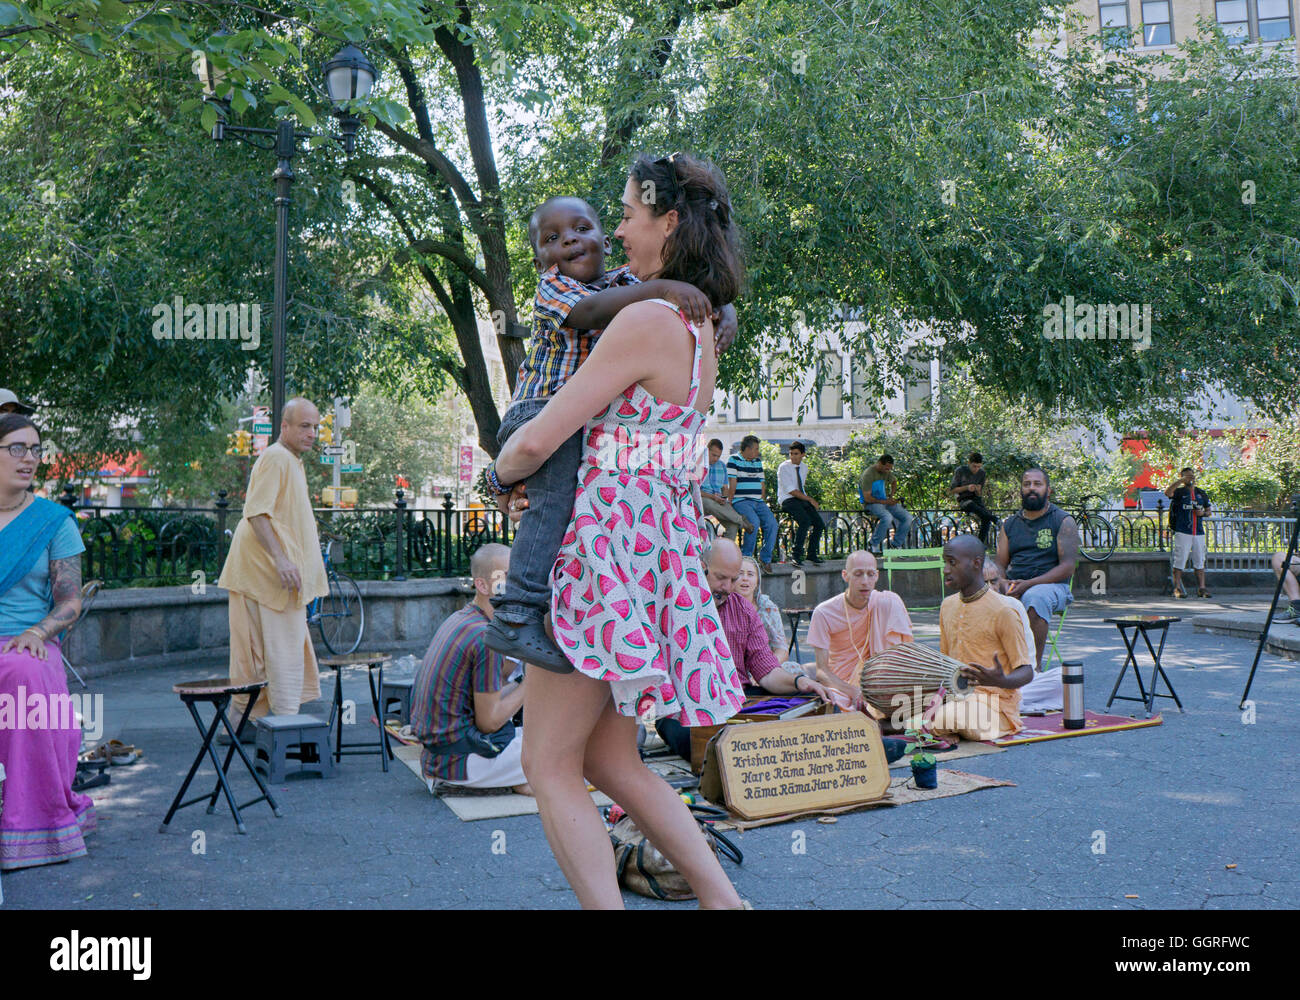 A pretty Caucasian lady dancing with a young African American child in front of Hare Krisna musicians in Union Square Park, NYC Stock Photo